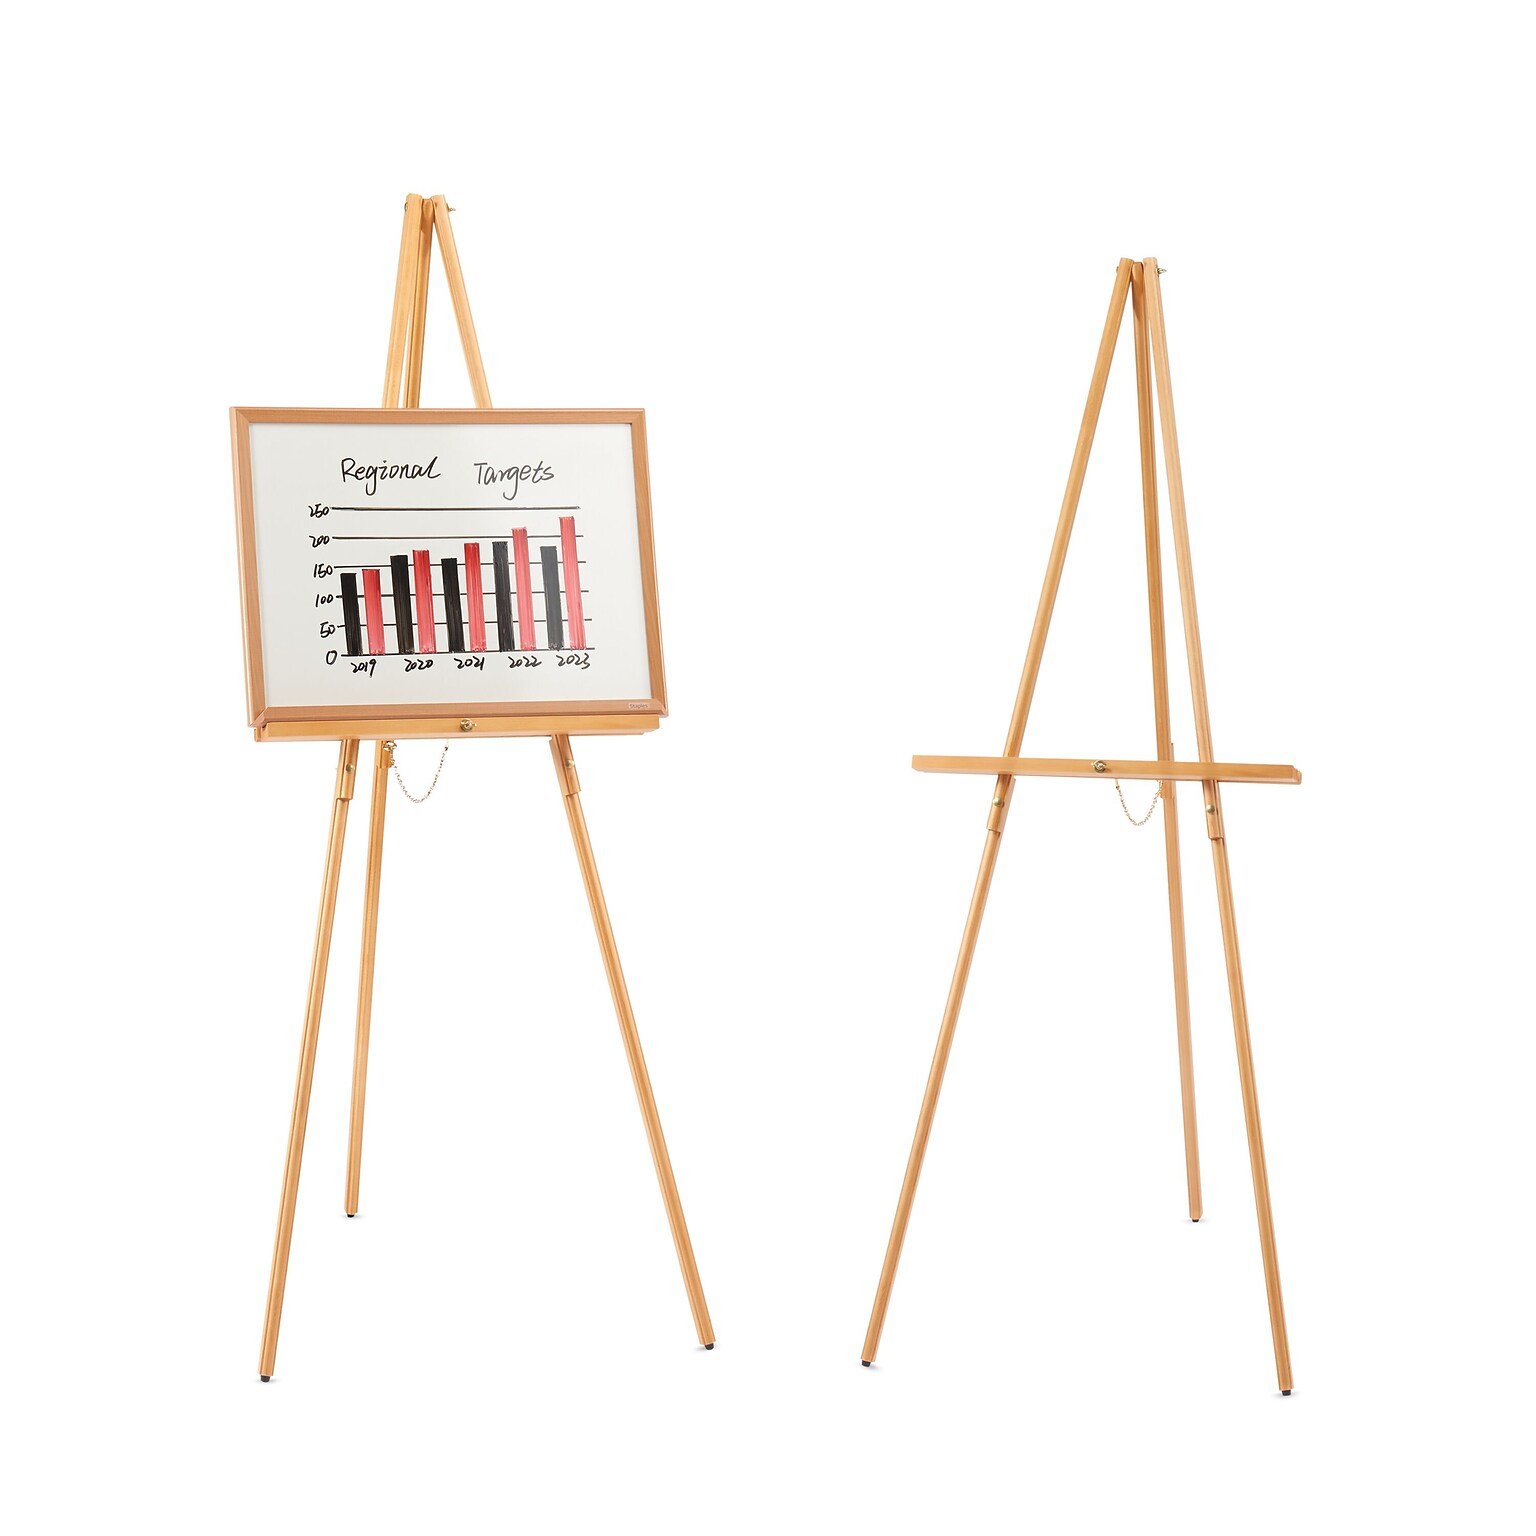 Quill Brand® Display Easel, 64, Natural Pine Hardwood (28219US/50447US)